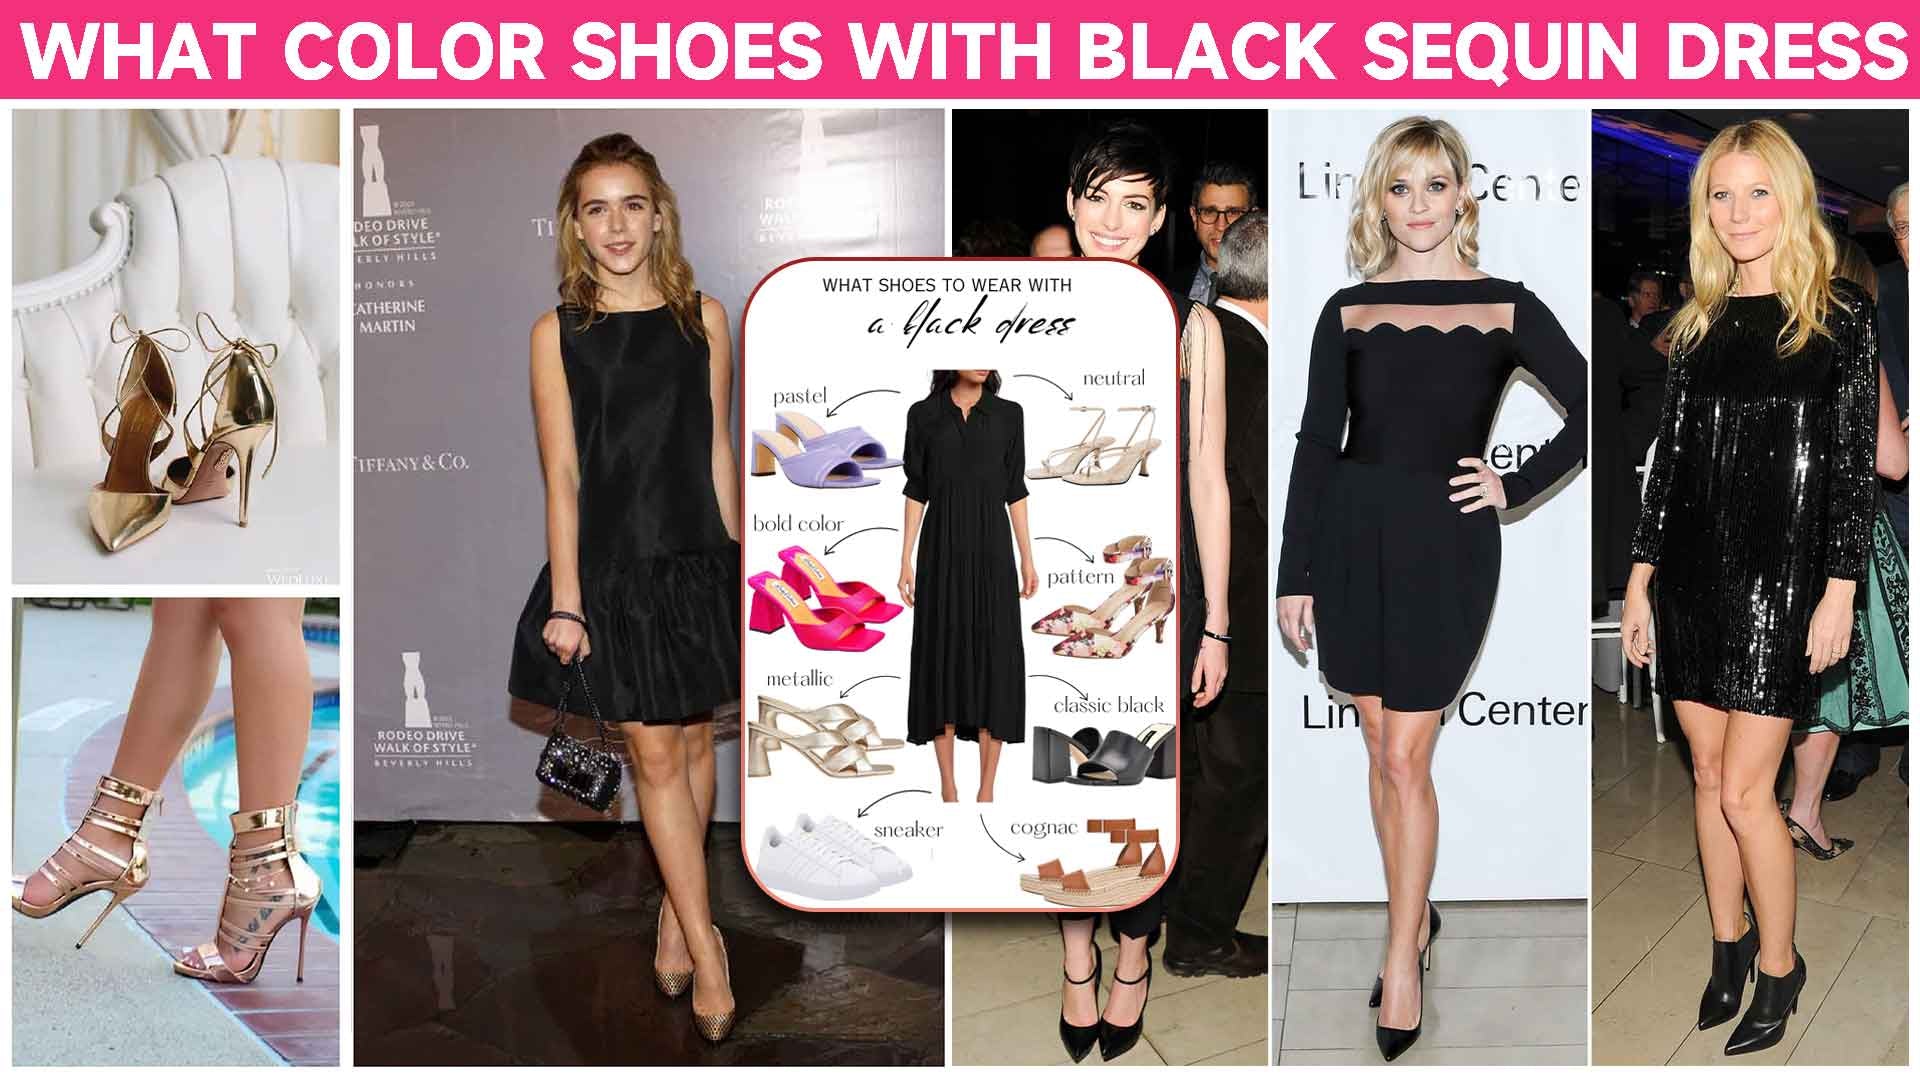 WHAT COLOR SHOES WITH BLACK SEQUIN DRESS